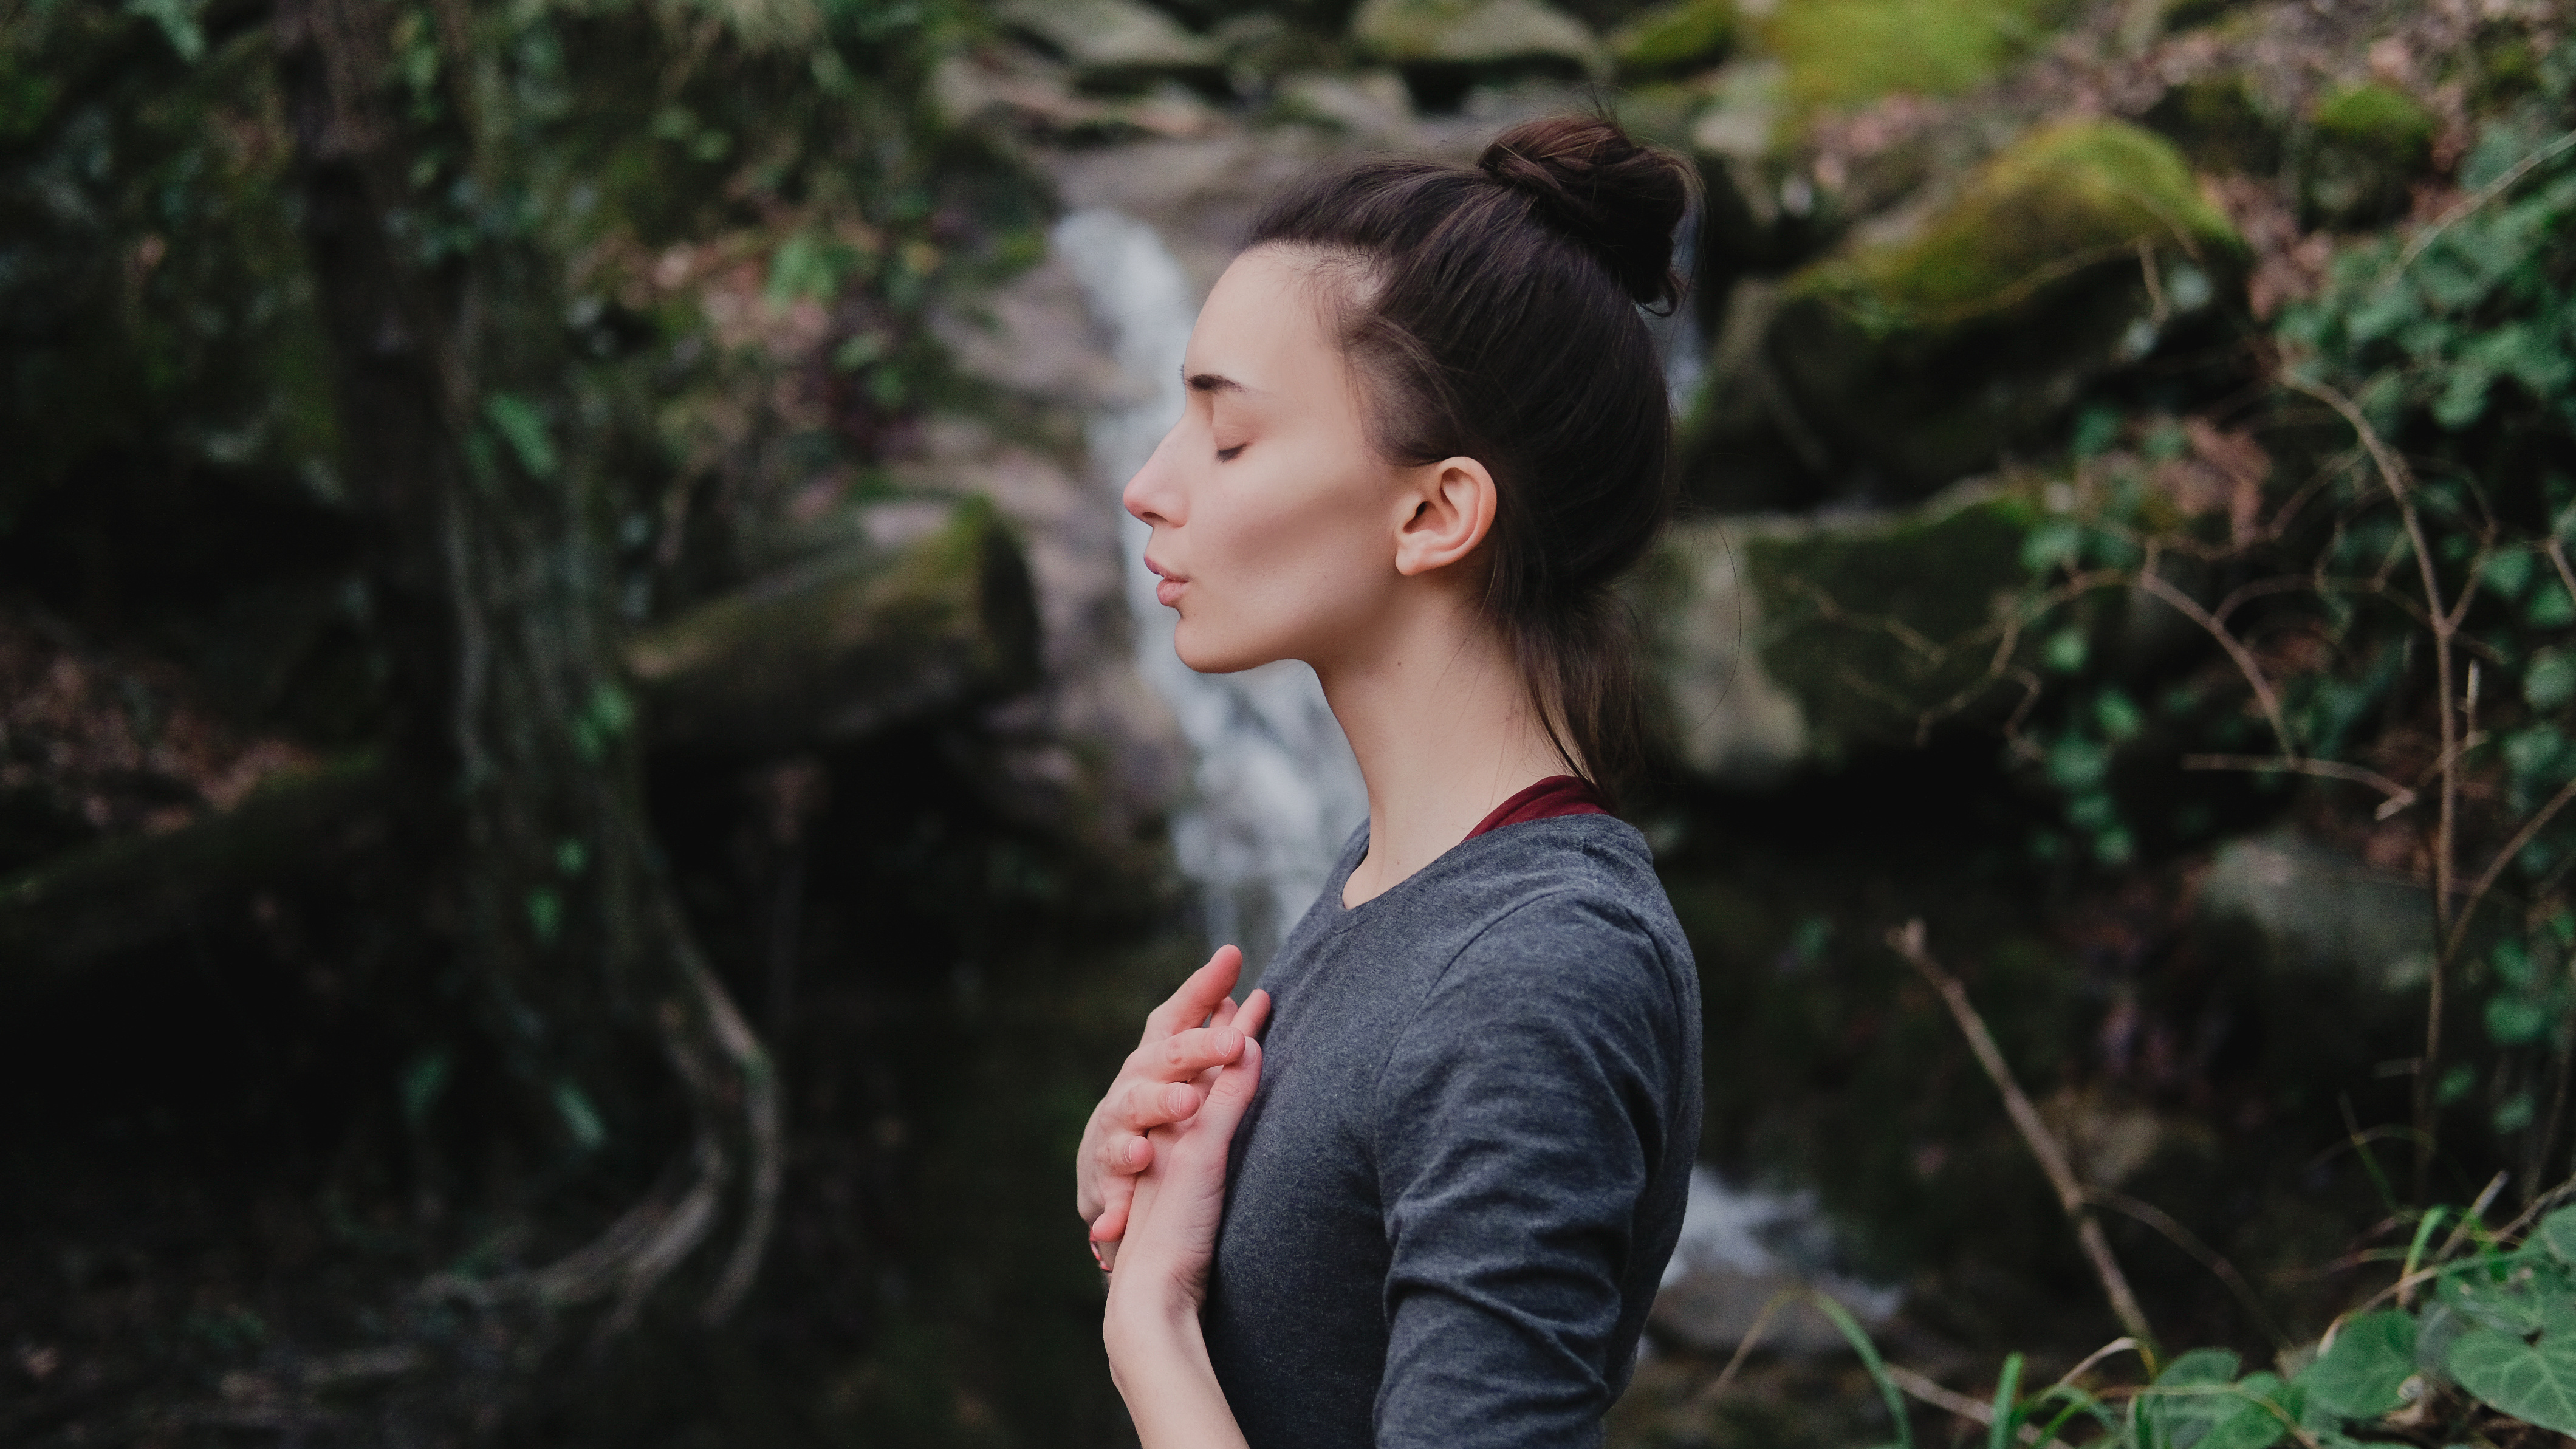 Is Breathing Connected to Free Will? - Woman breathing with eyes closed and hands on heart